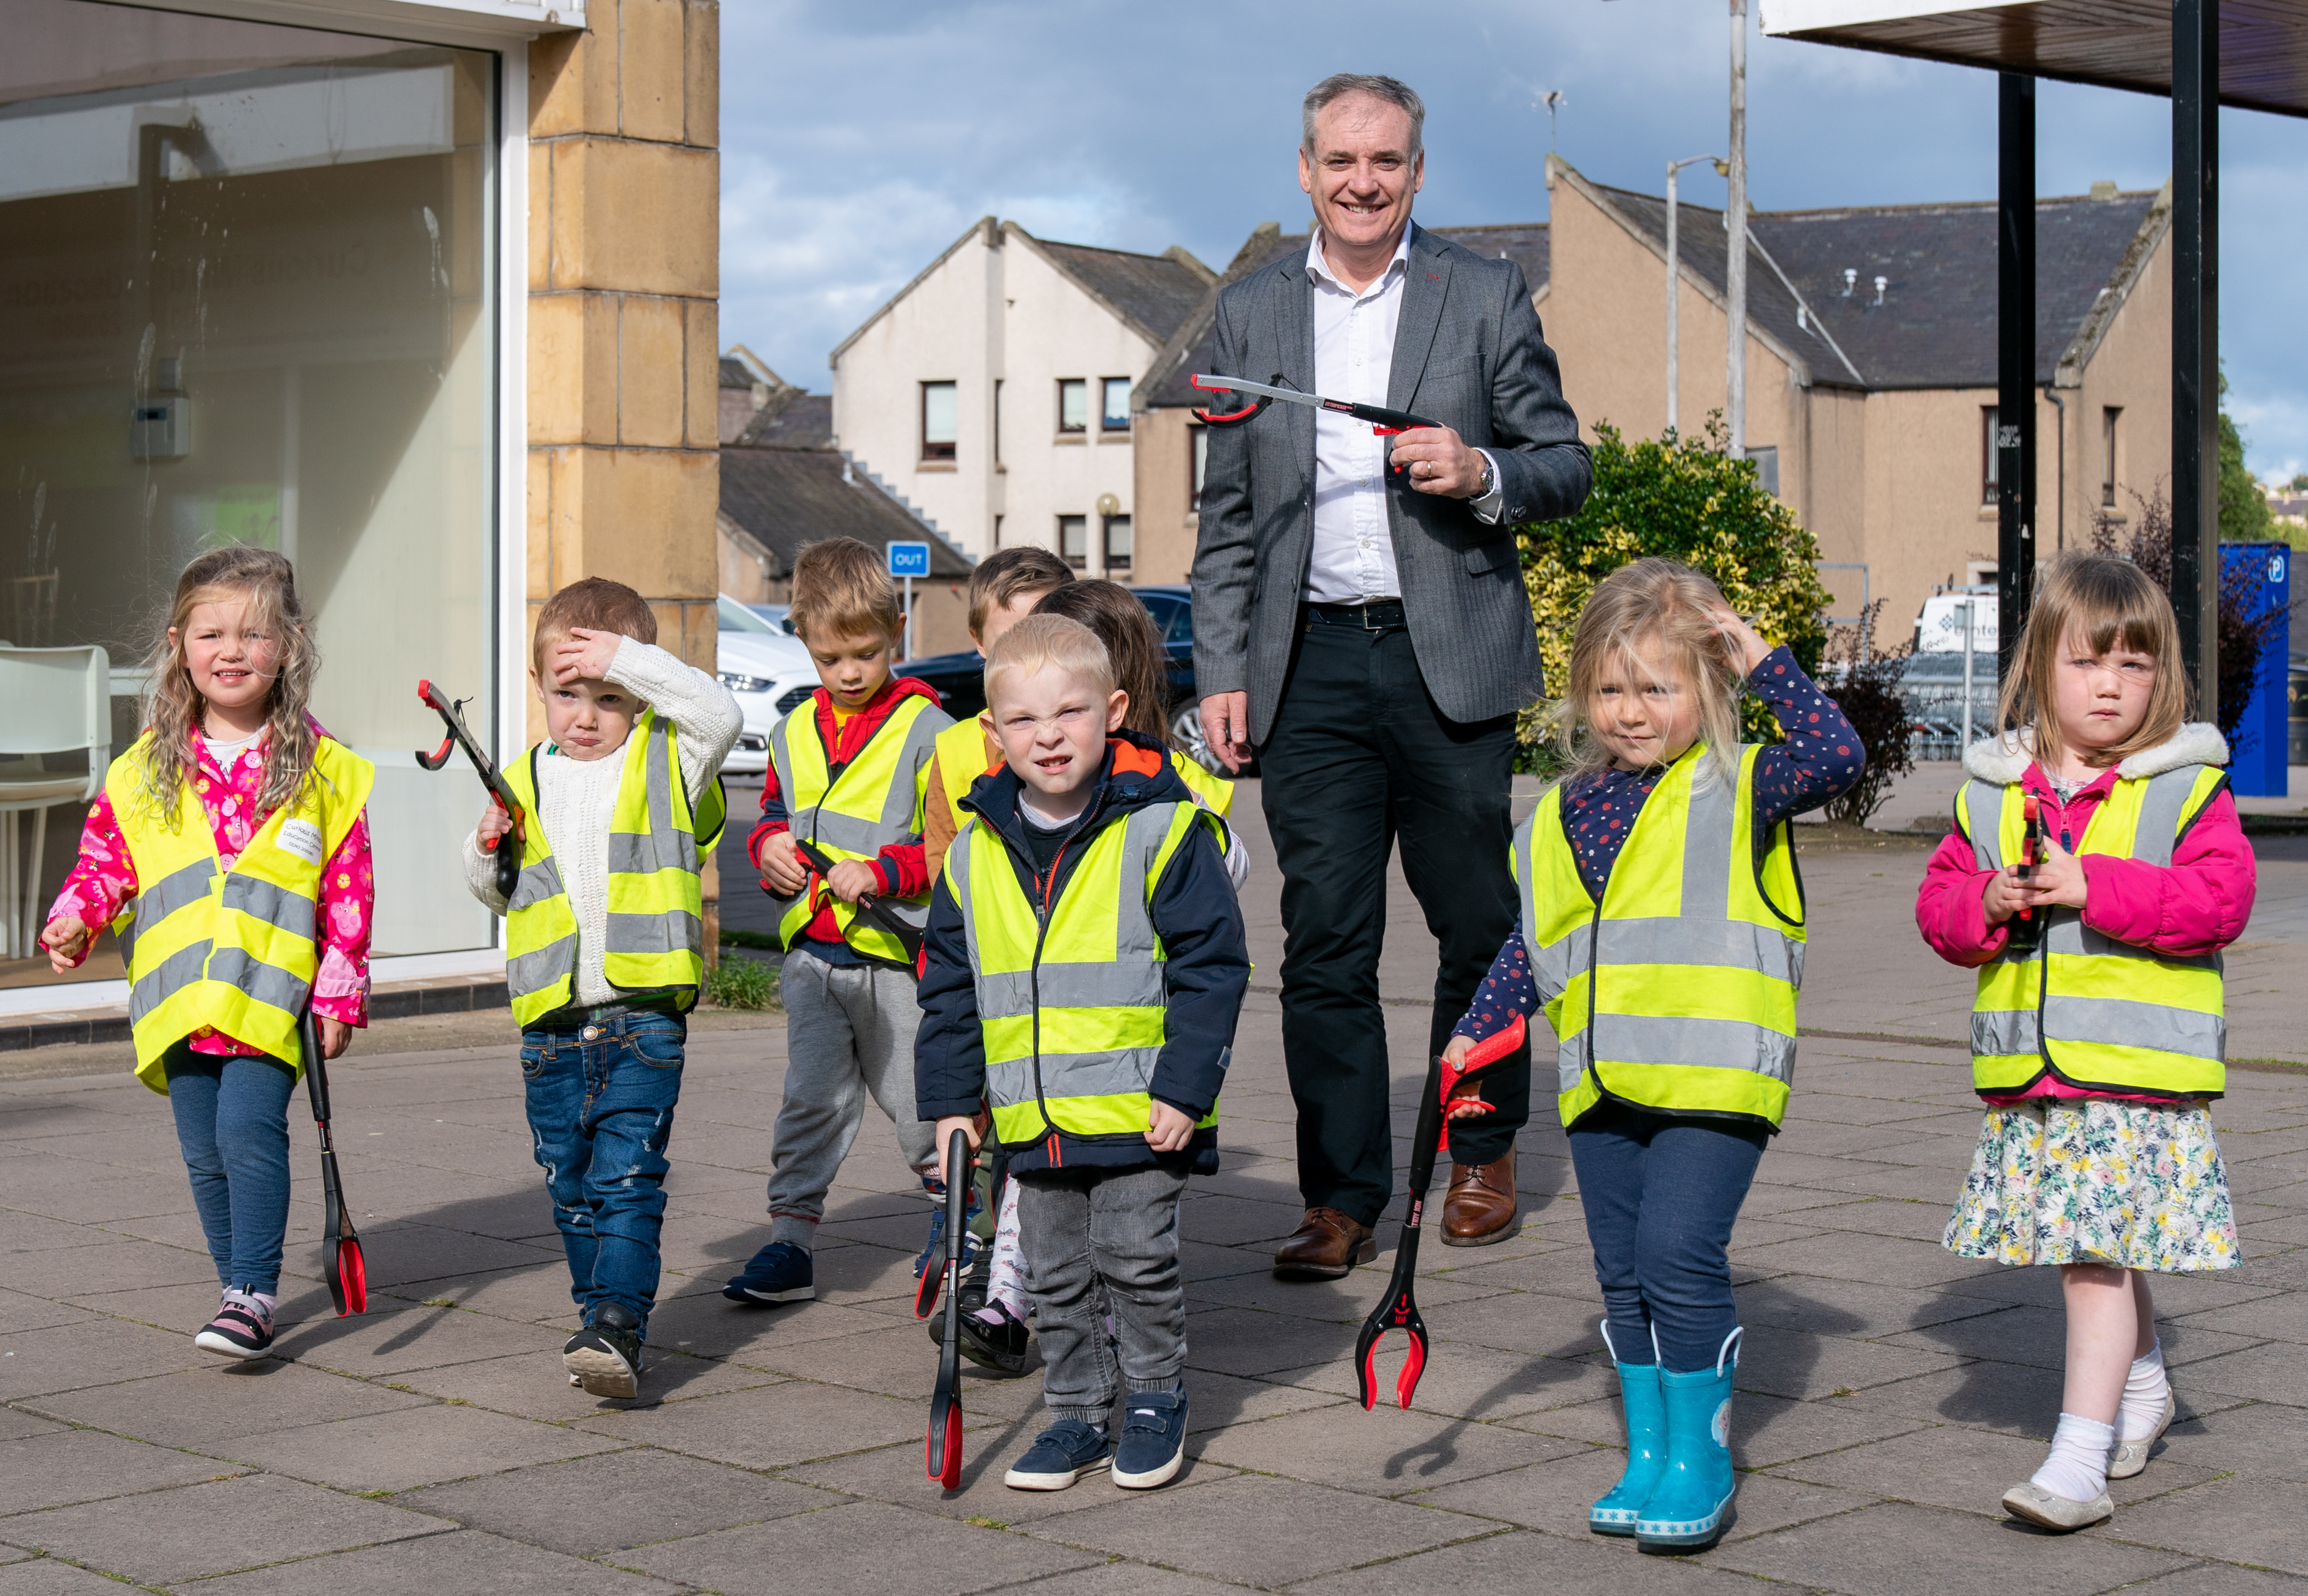 Moray MSP Richard Lochhead joins the children from the Curious Minds nursery on their litter pick.